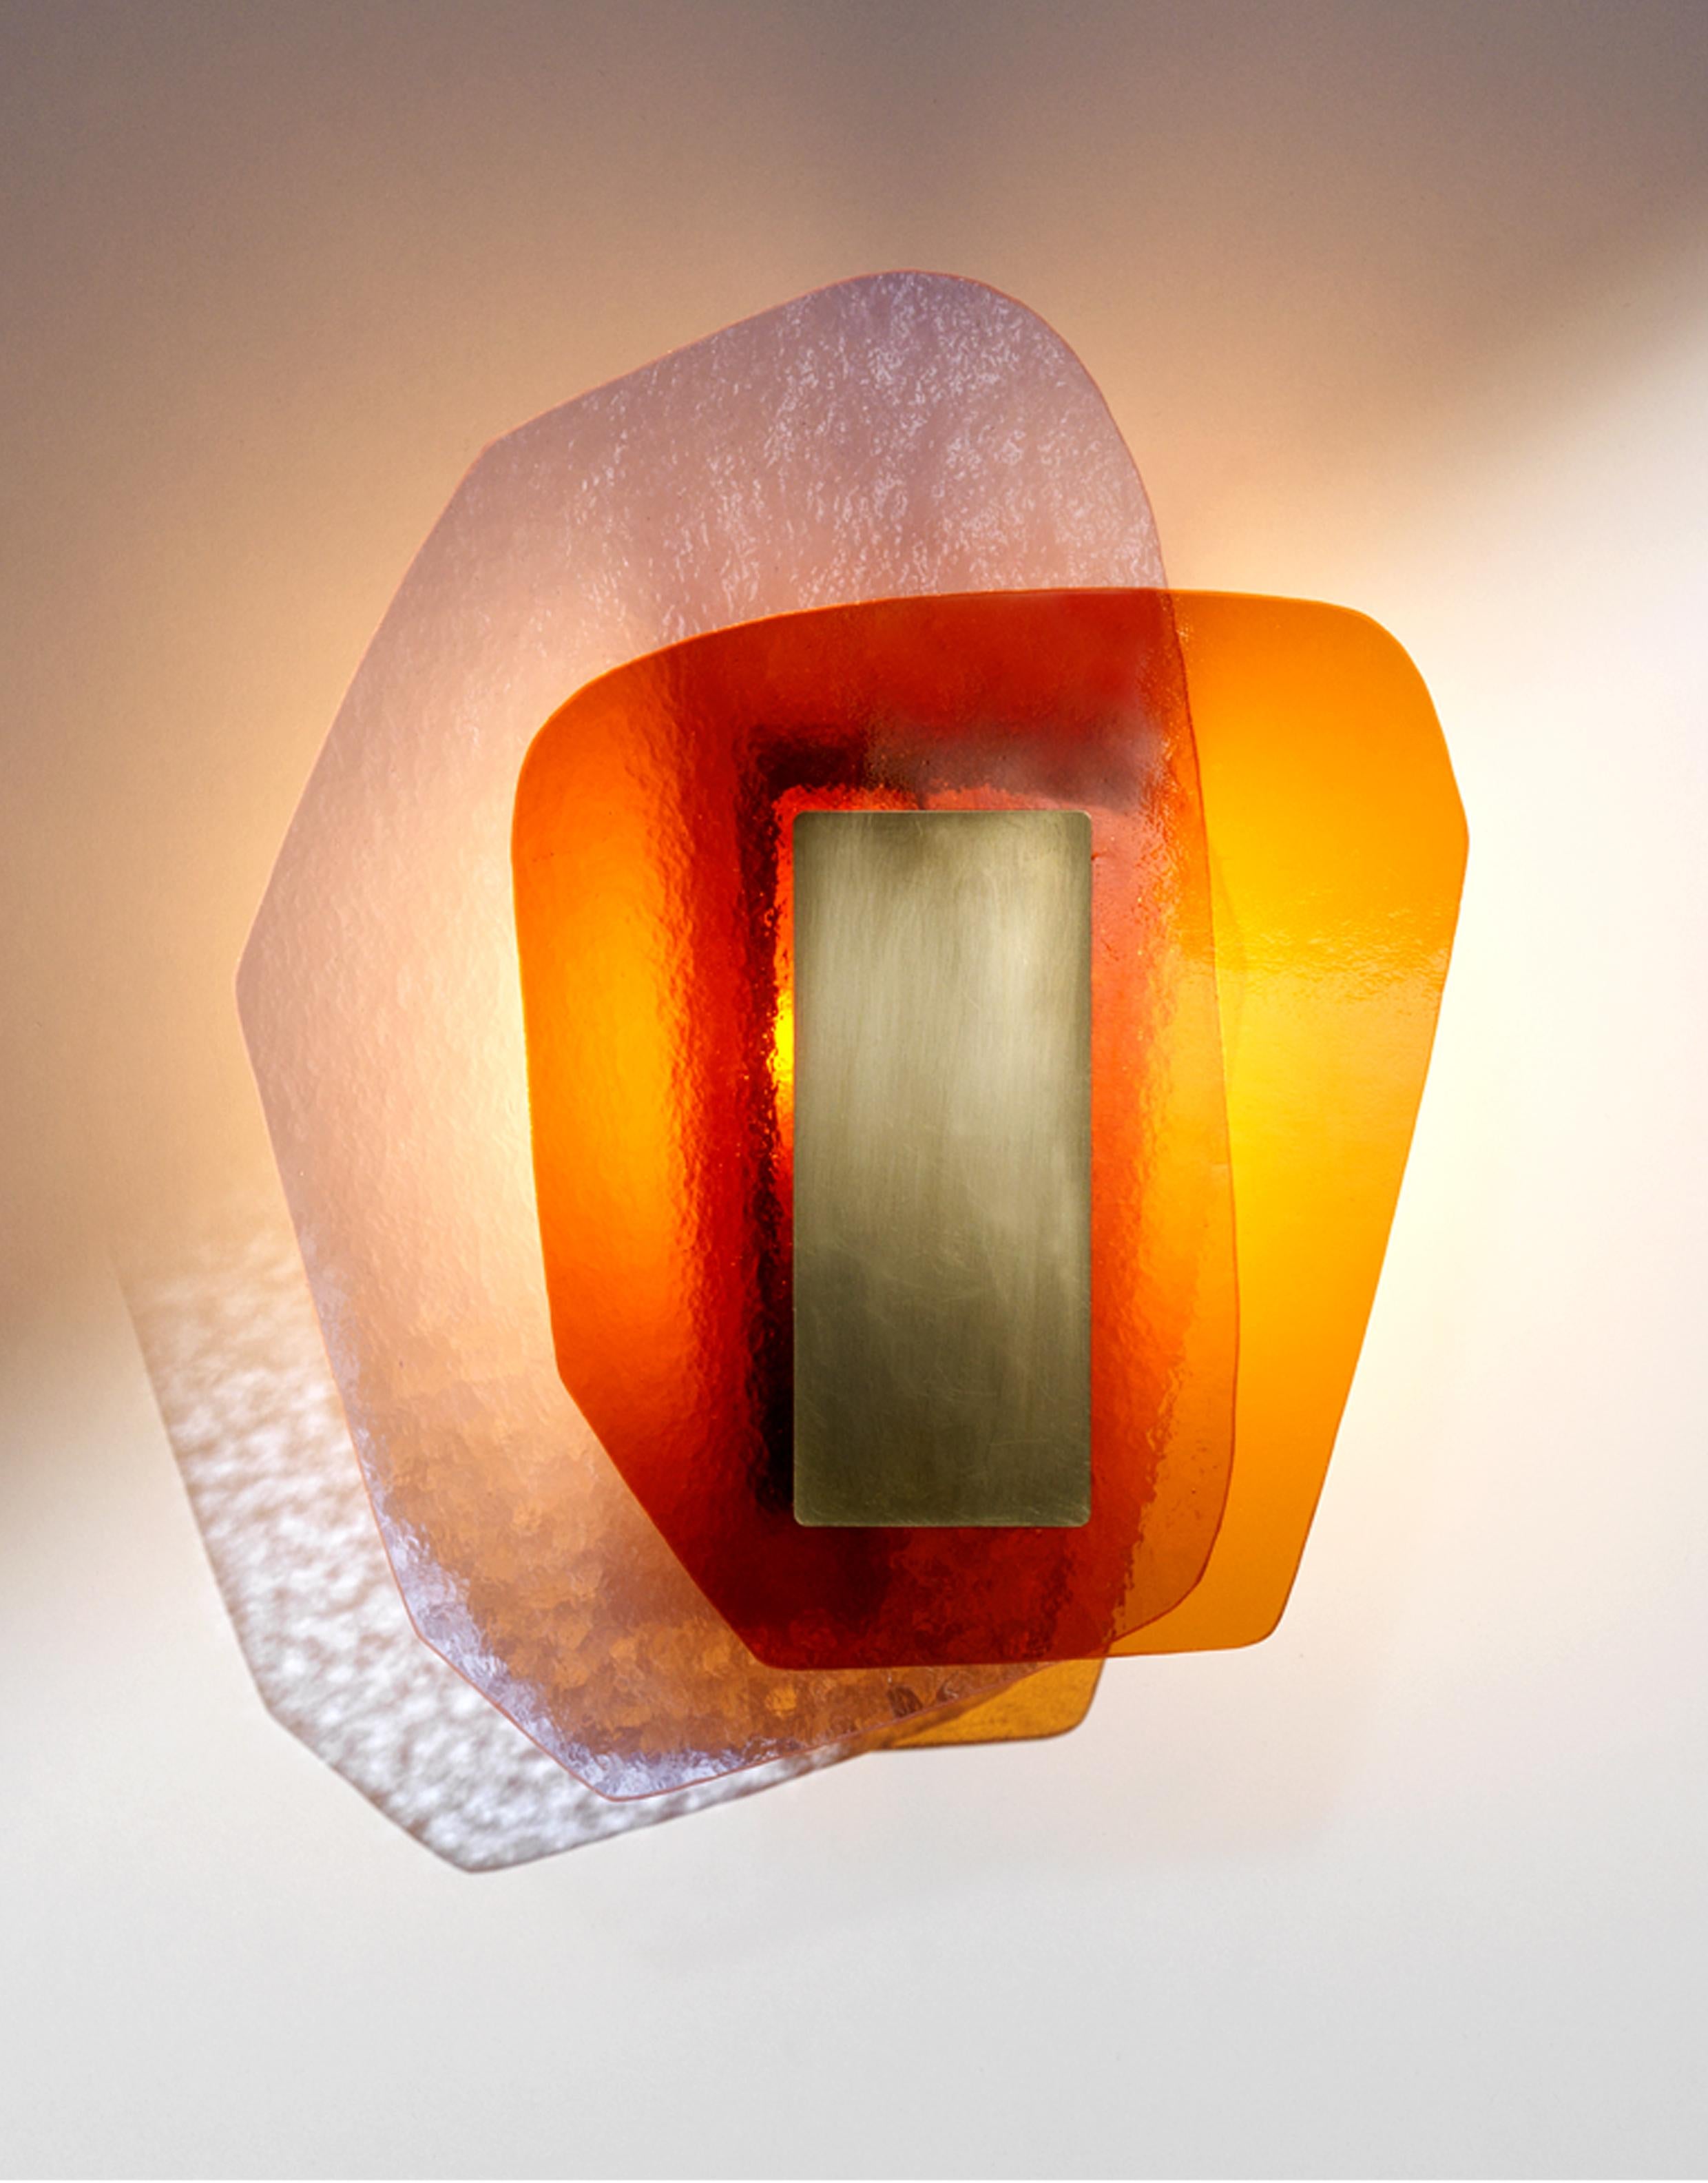 Unity light sculpture by Marie Jeunet
Dimensions: H 34 x L 26 cm
Materials: Lilac hammered glass sheet, smooth amber glass sheet, brushed brass structure and finish

Les Precieux
These luminous sculptures evolve with the rhythm of the passing